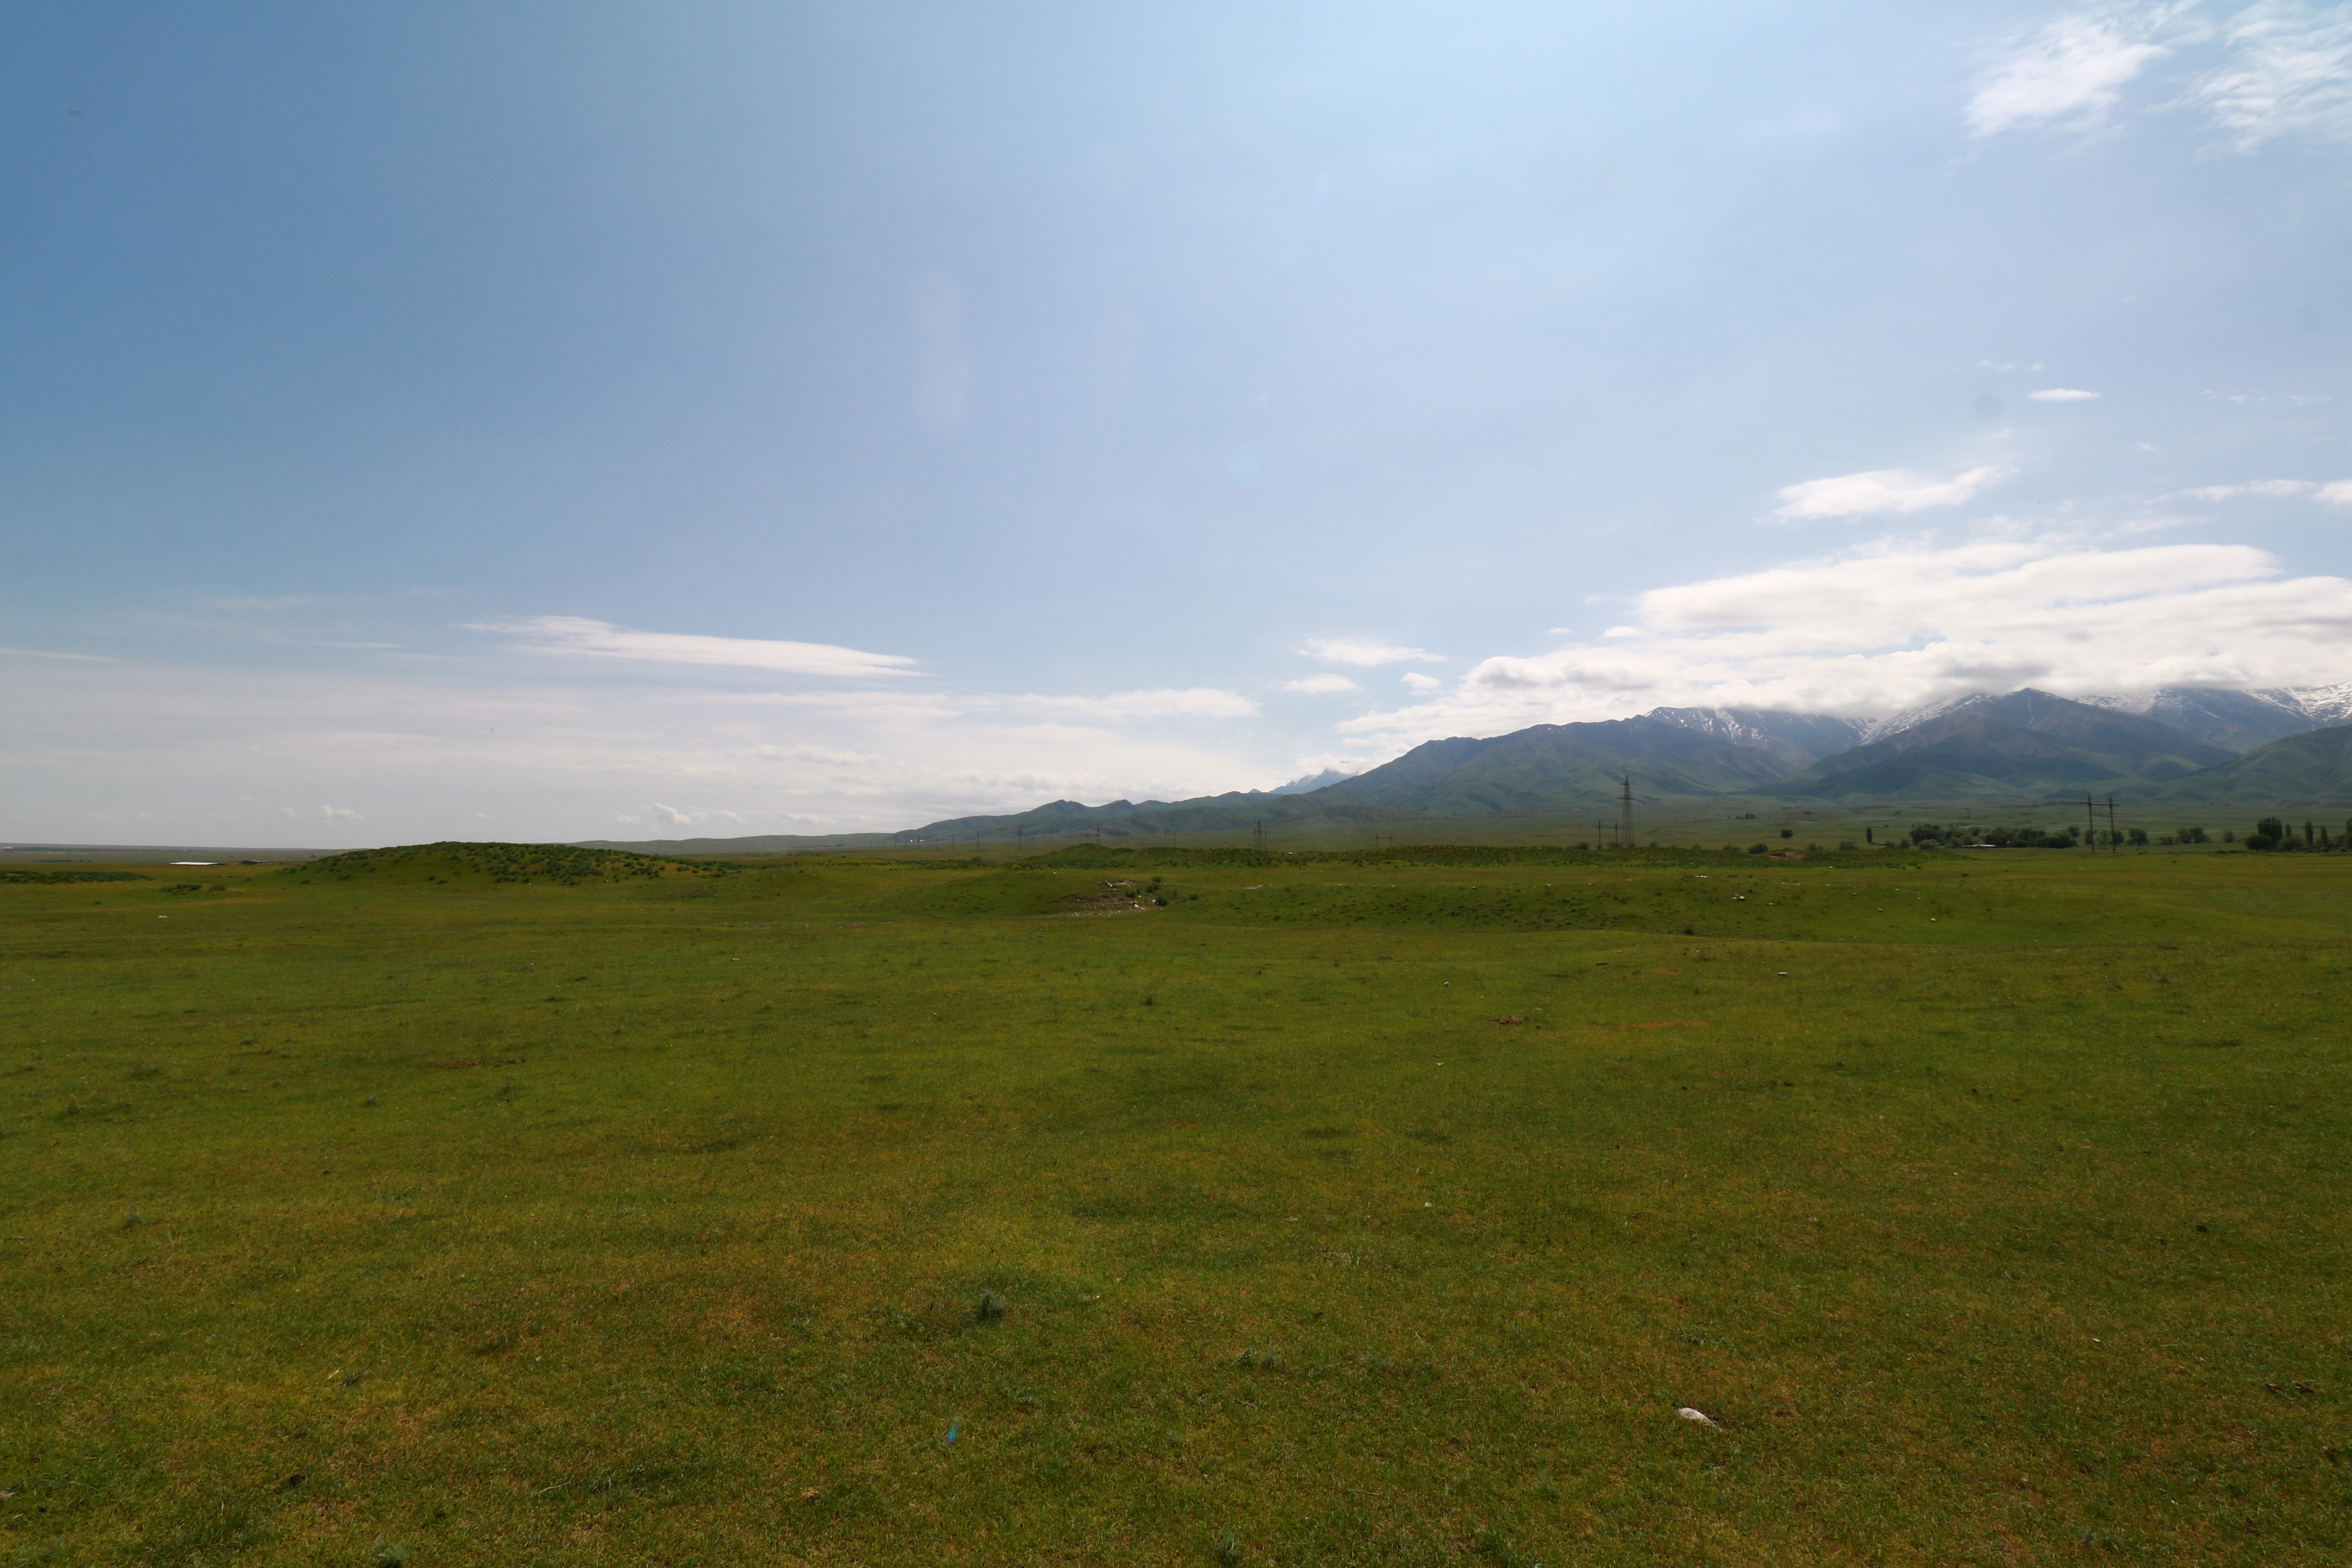 Ornek lies on a grassy plain at the foot of the mountains © Site of Ornek